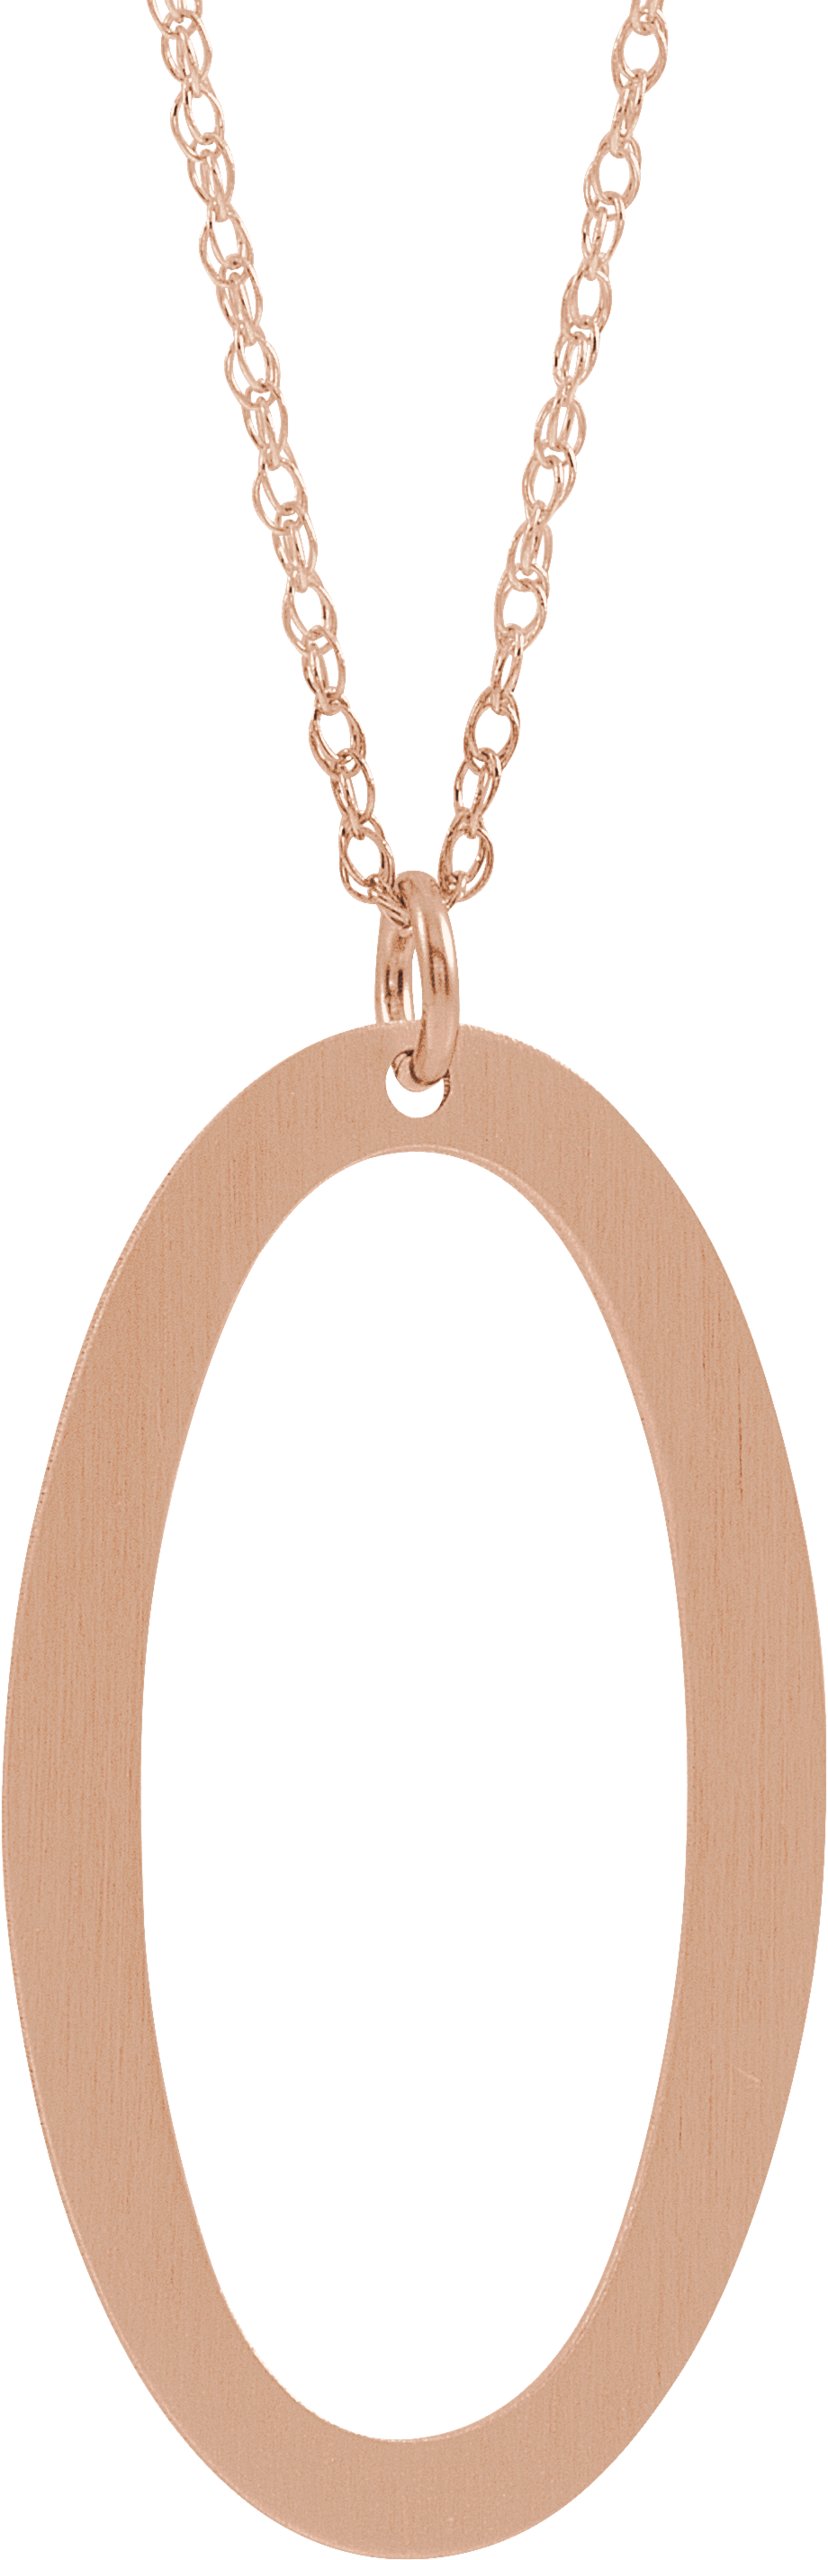 14K Rose Gold-Plated Sterling Silver Block Initial O 16-18" Necklace with Brush Finish